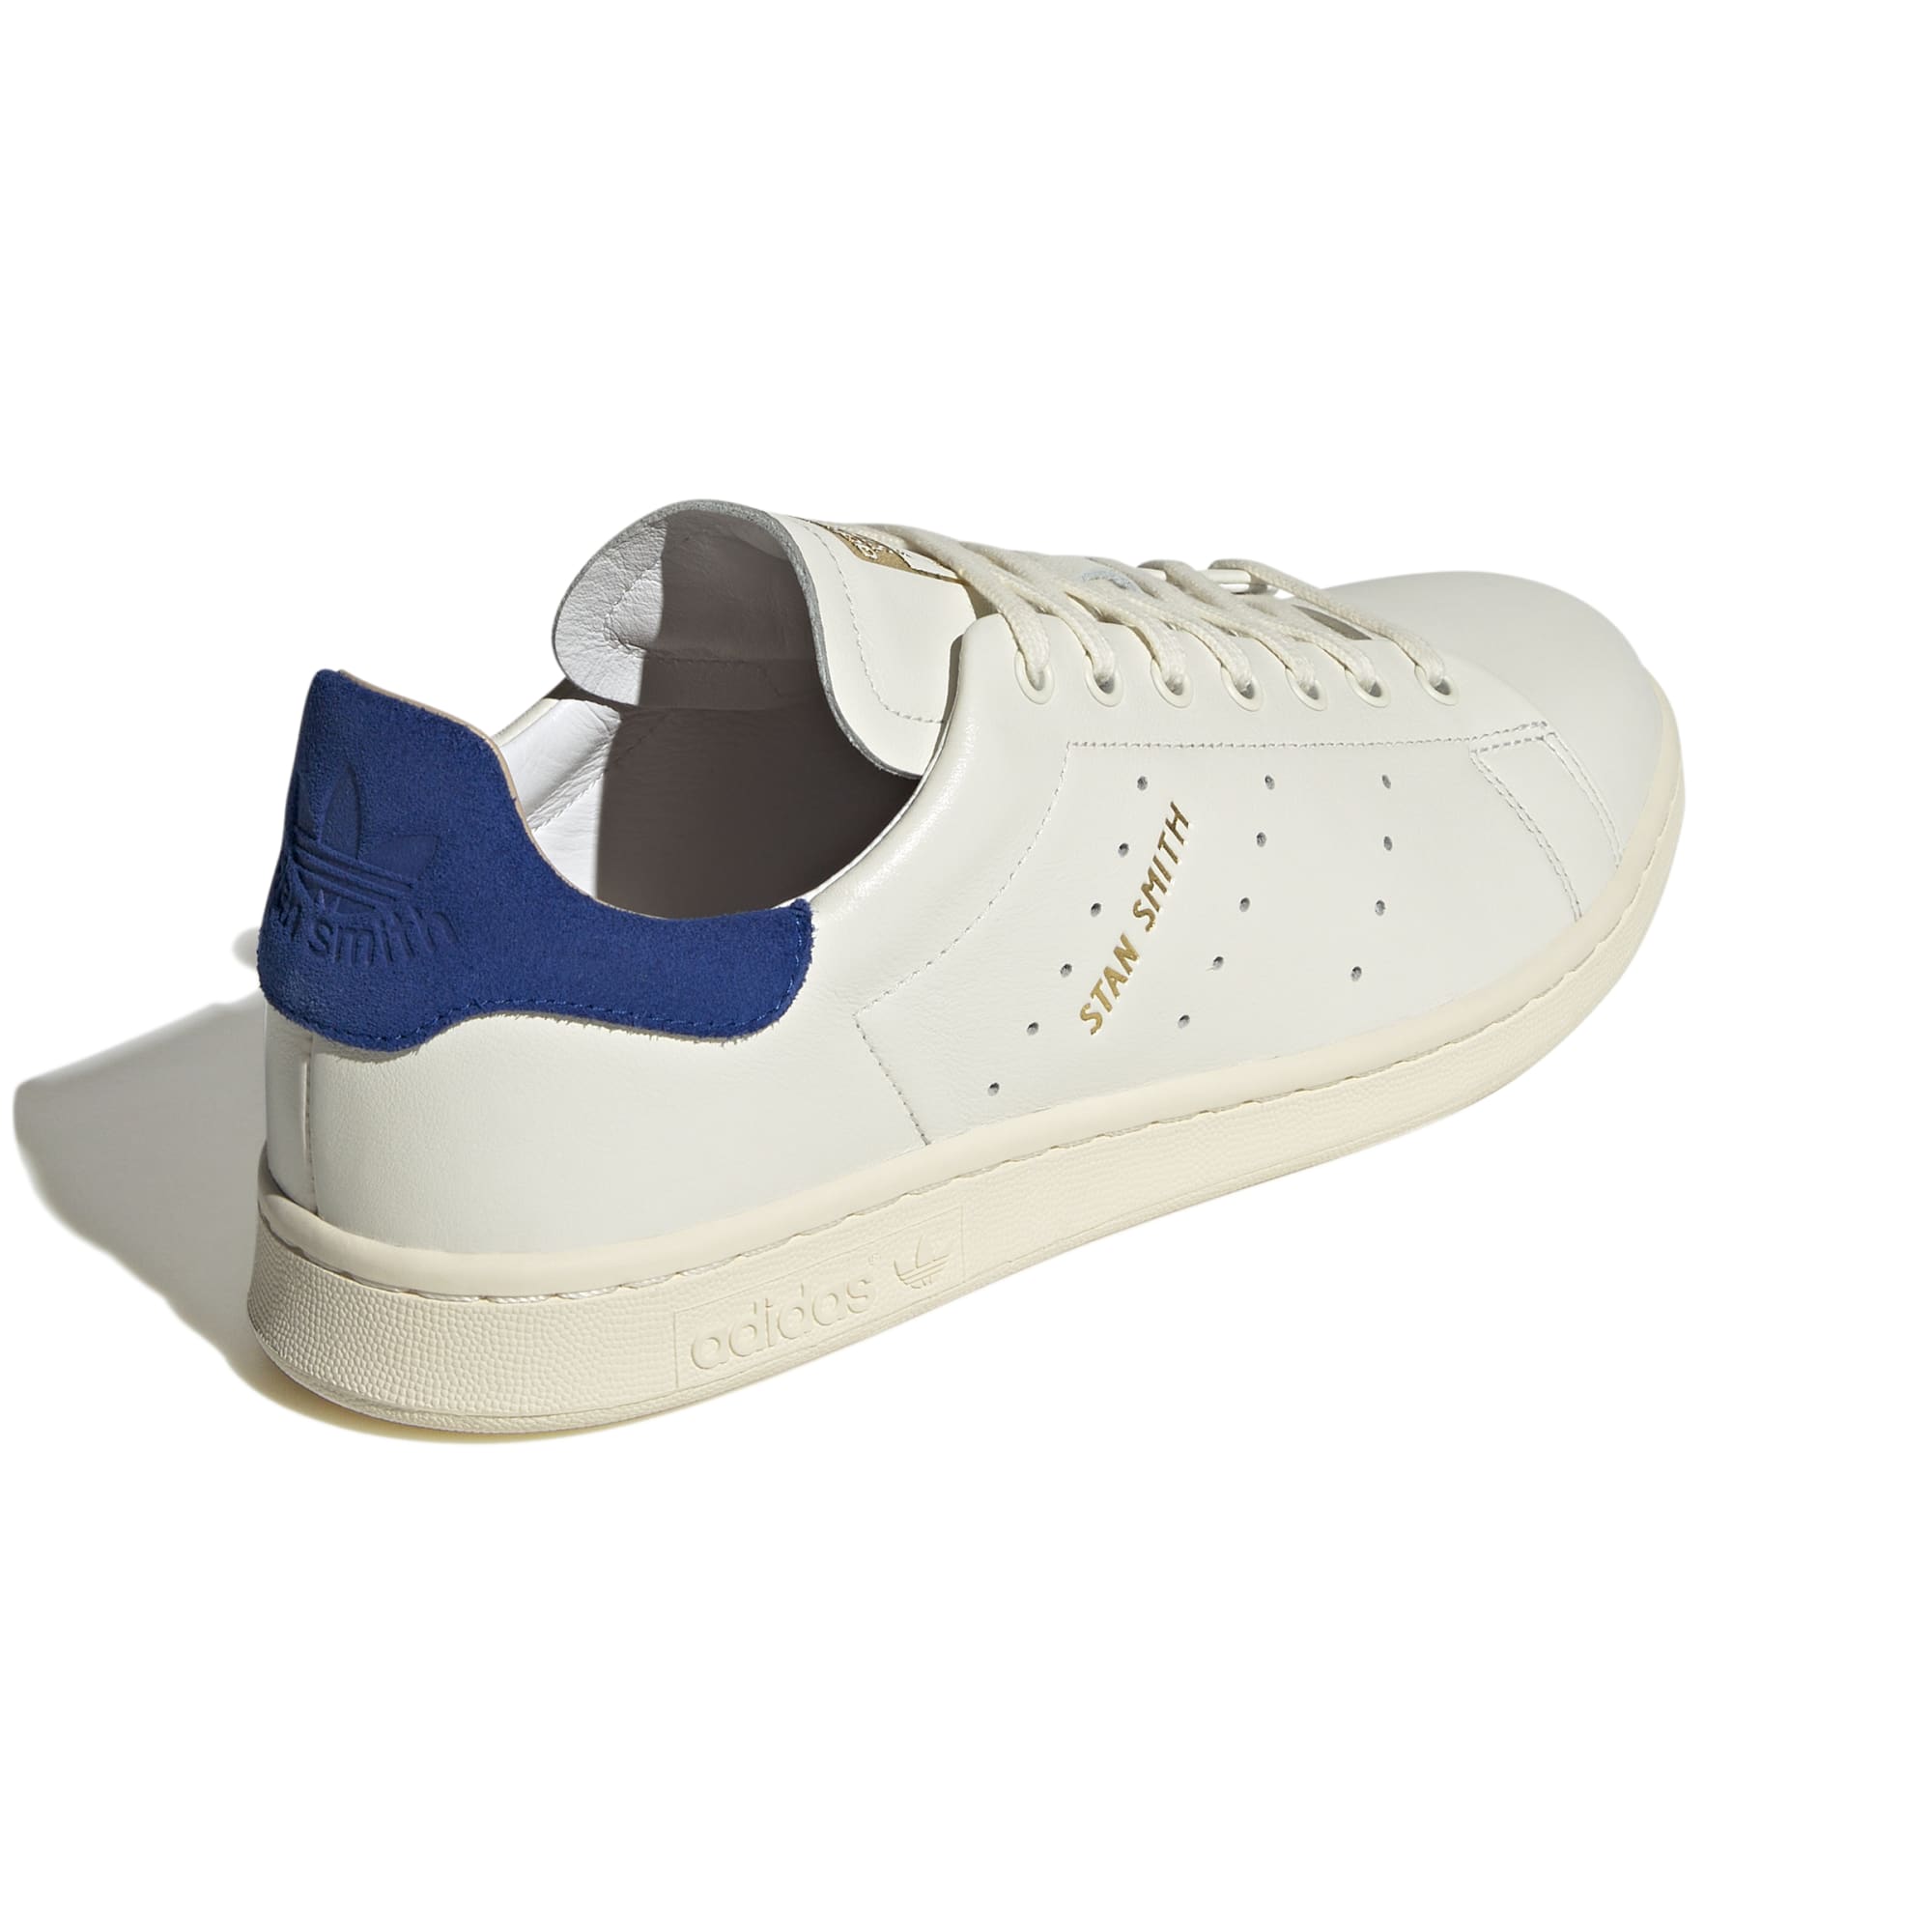 ADIDAS STAN SMITH LUX ID1995 SNEAKER (M)-7